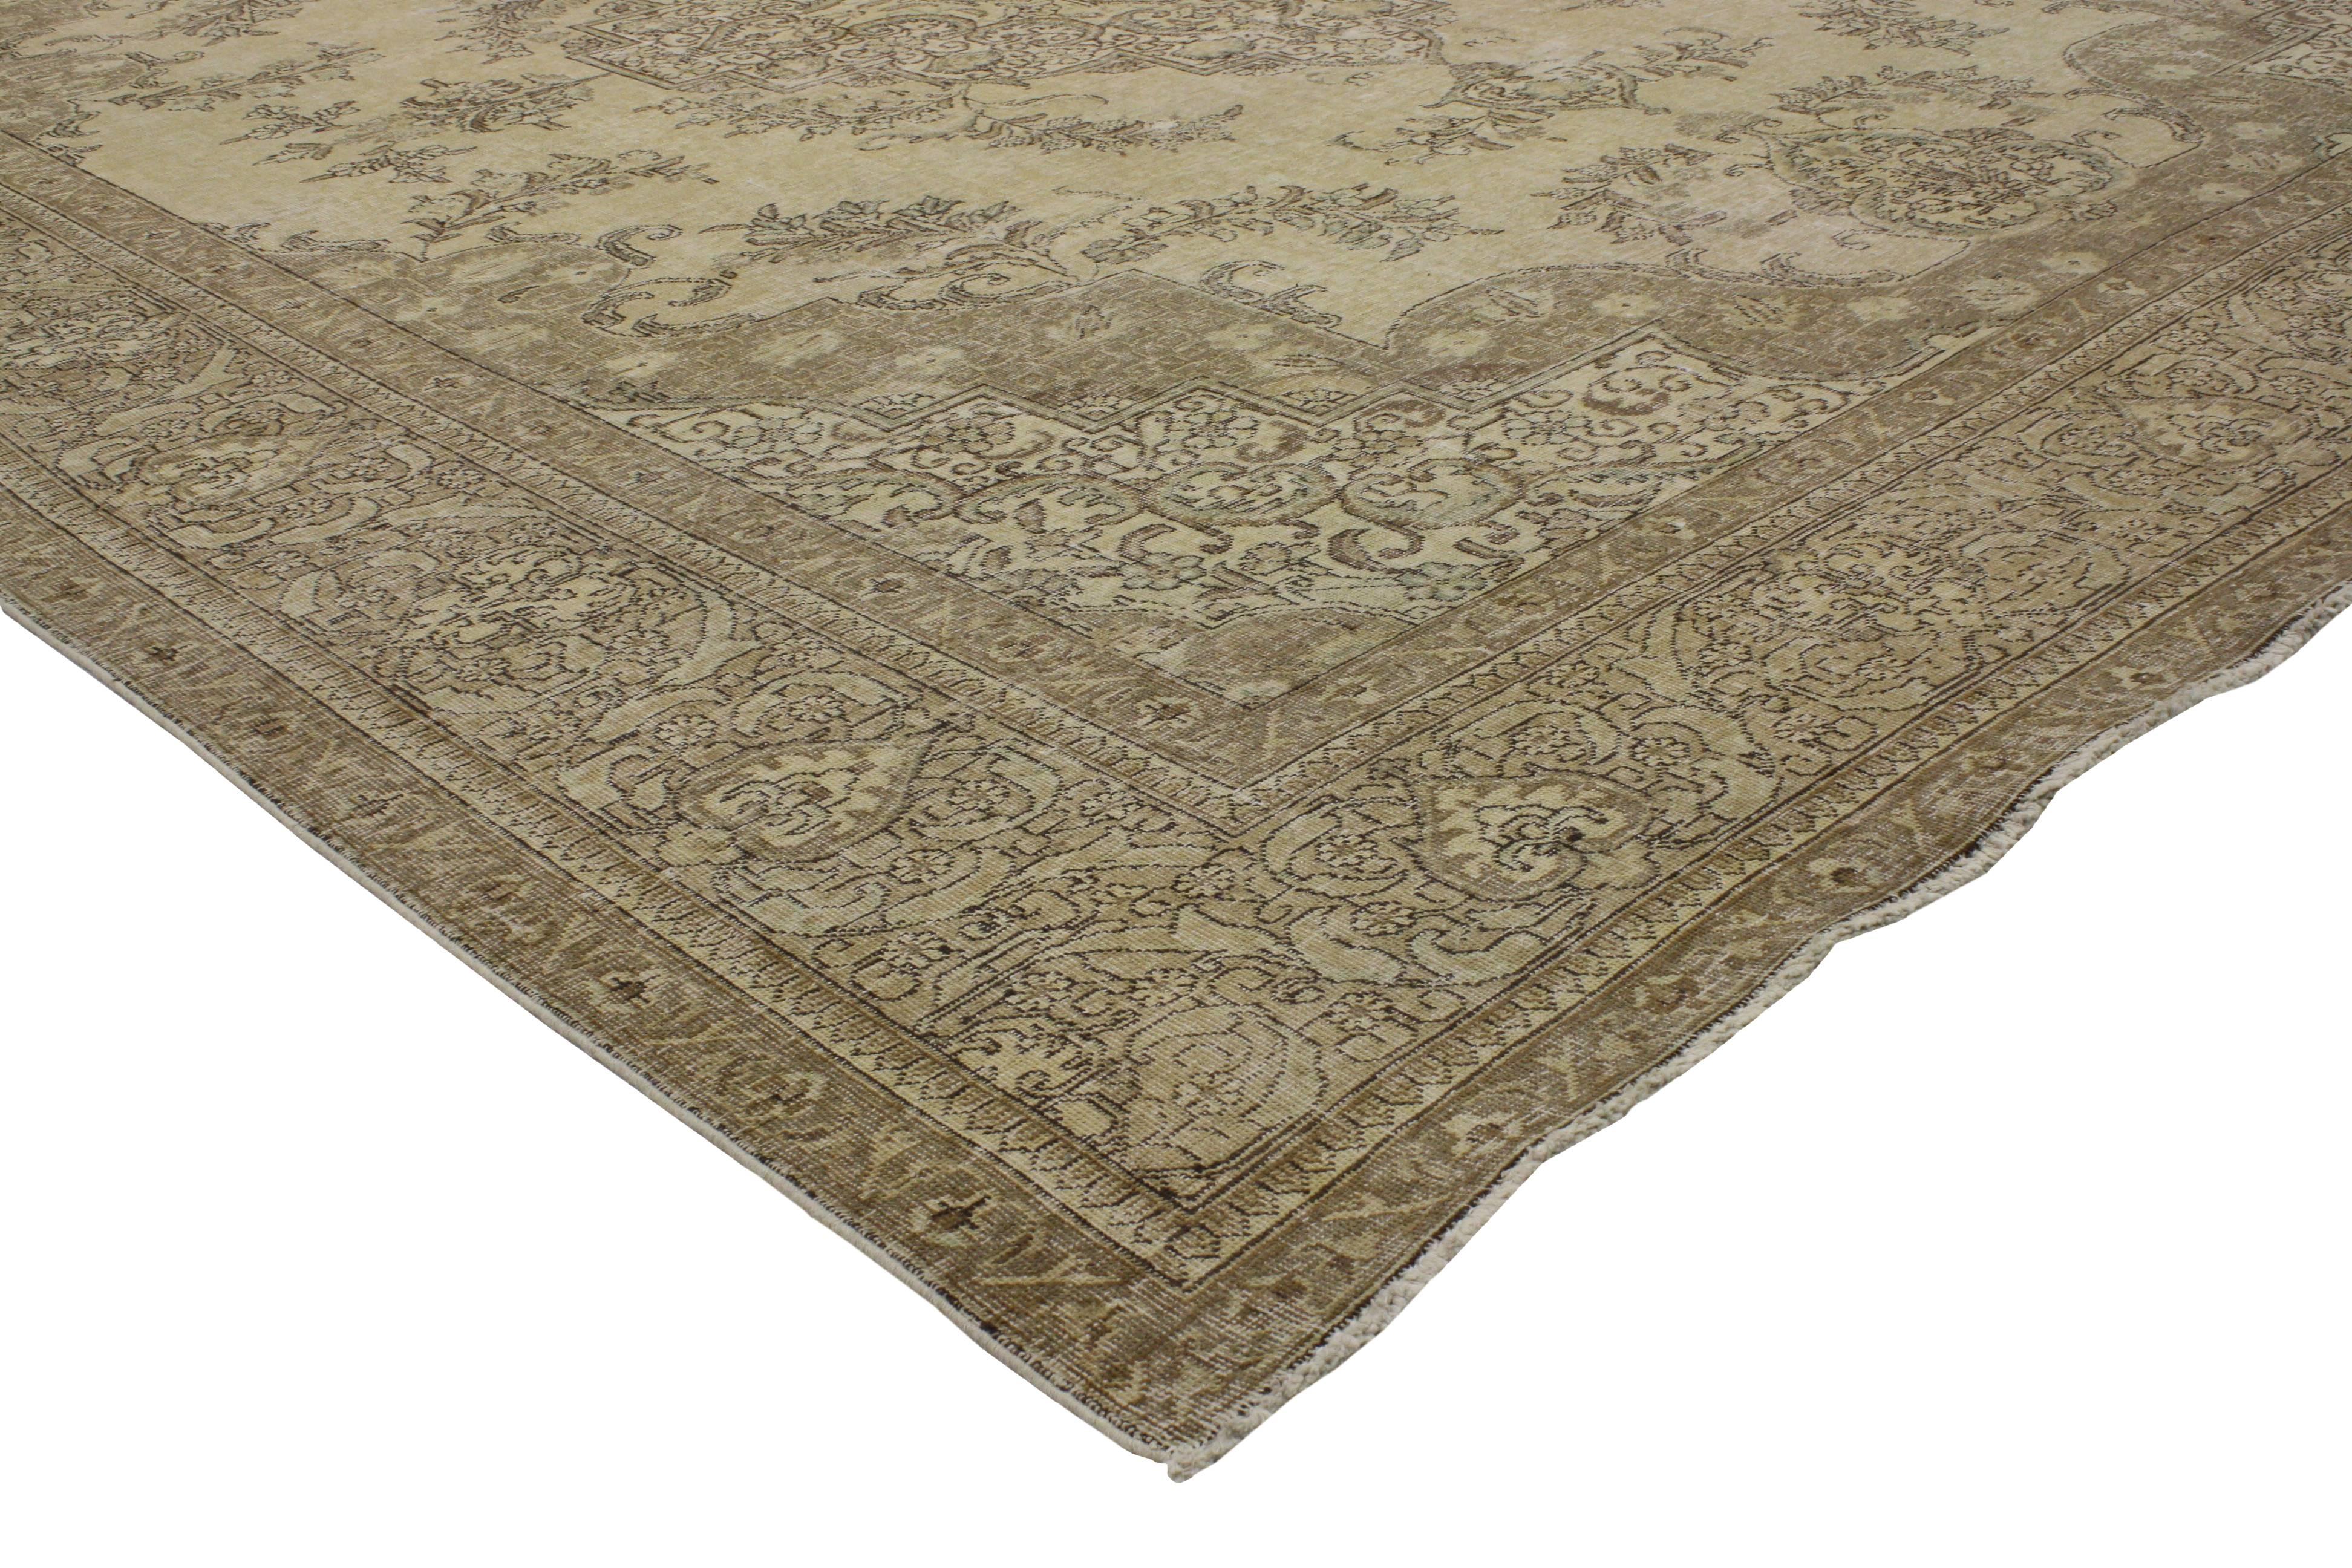 80313 Distressed Vintage Persian Tabriz Rug with Modern Refined French Industrial Style. Subdued neutral colors and an elegant combination of texture and pattern create a calm base for this vintage Persian Tabriz rug with modern Industrial style.